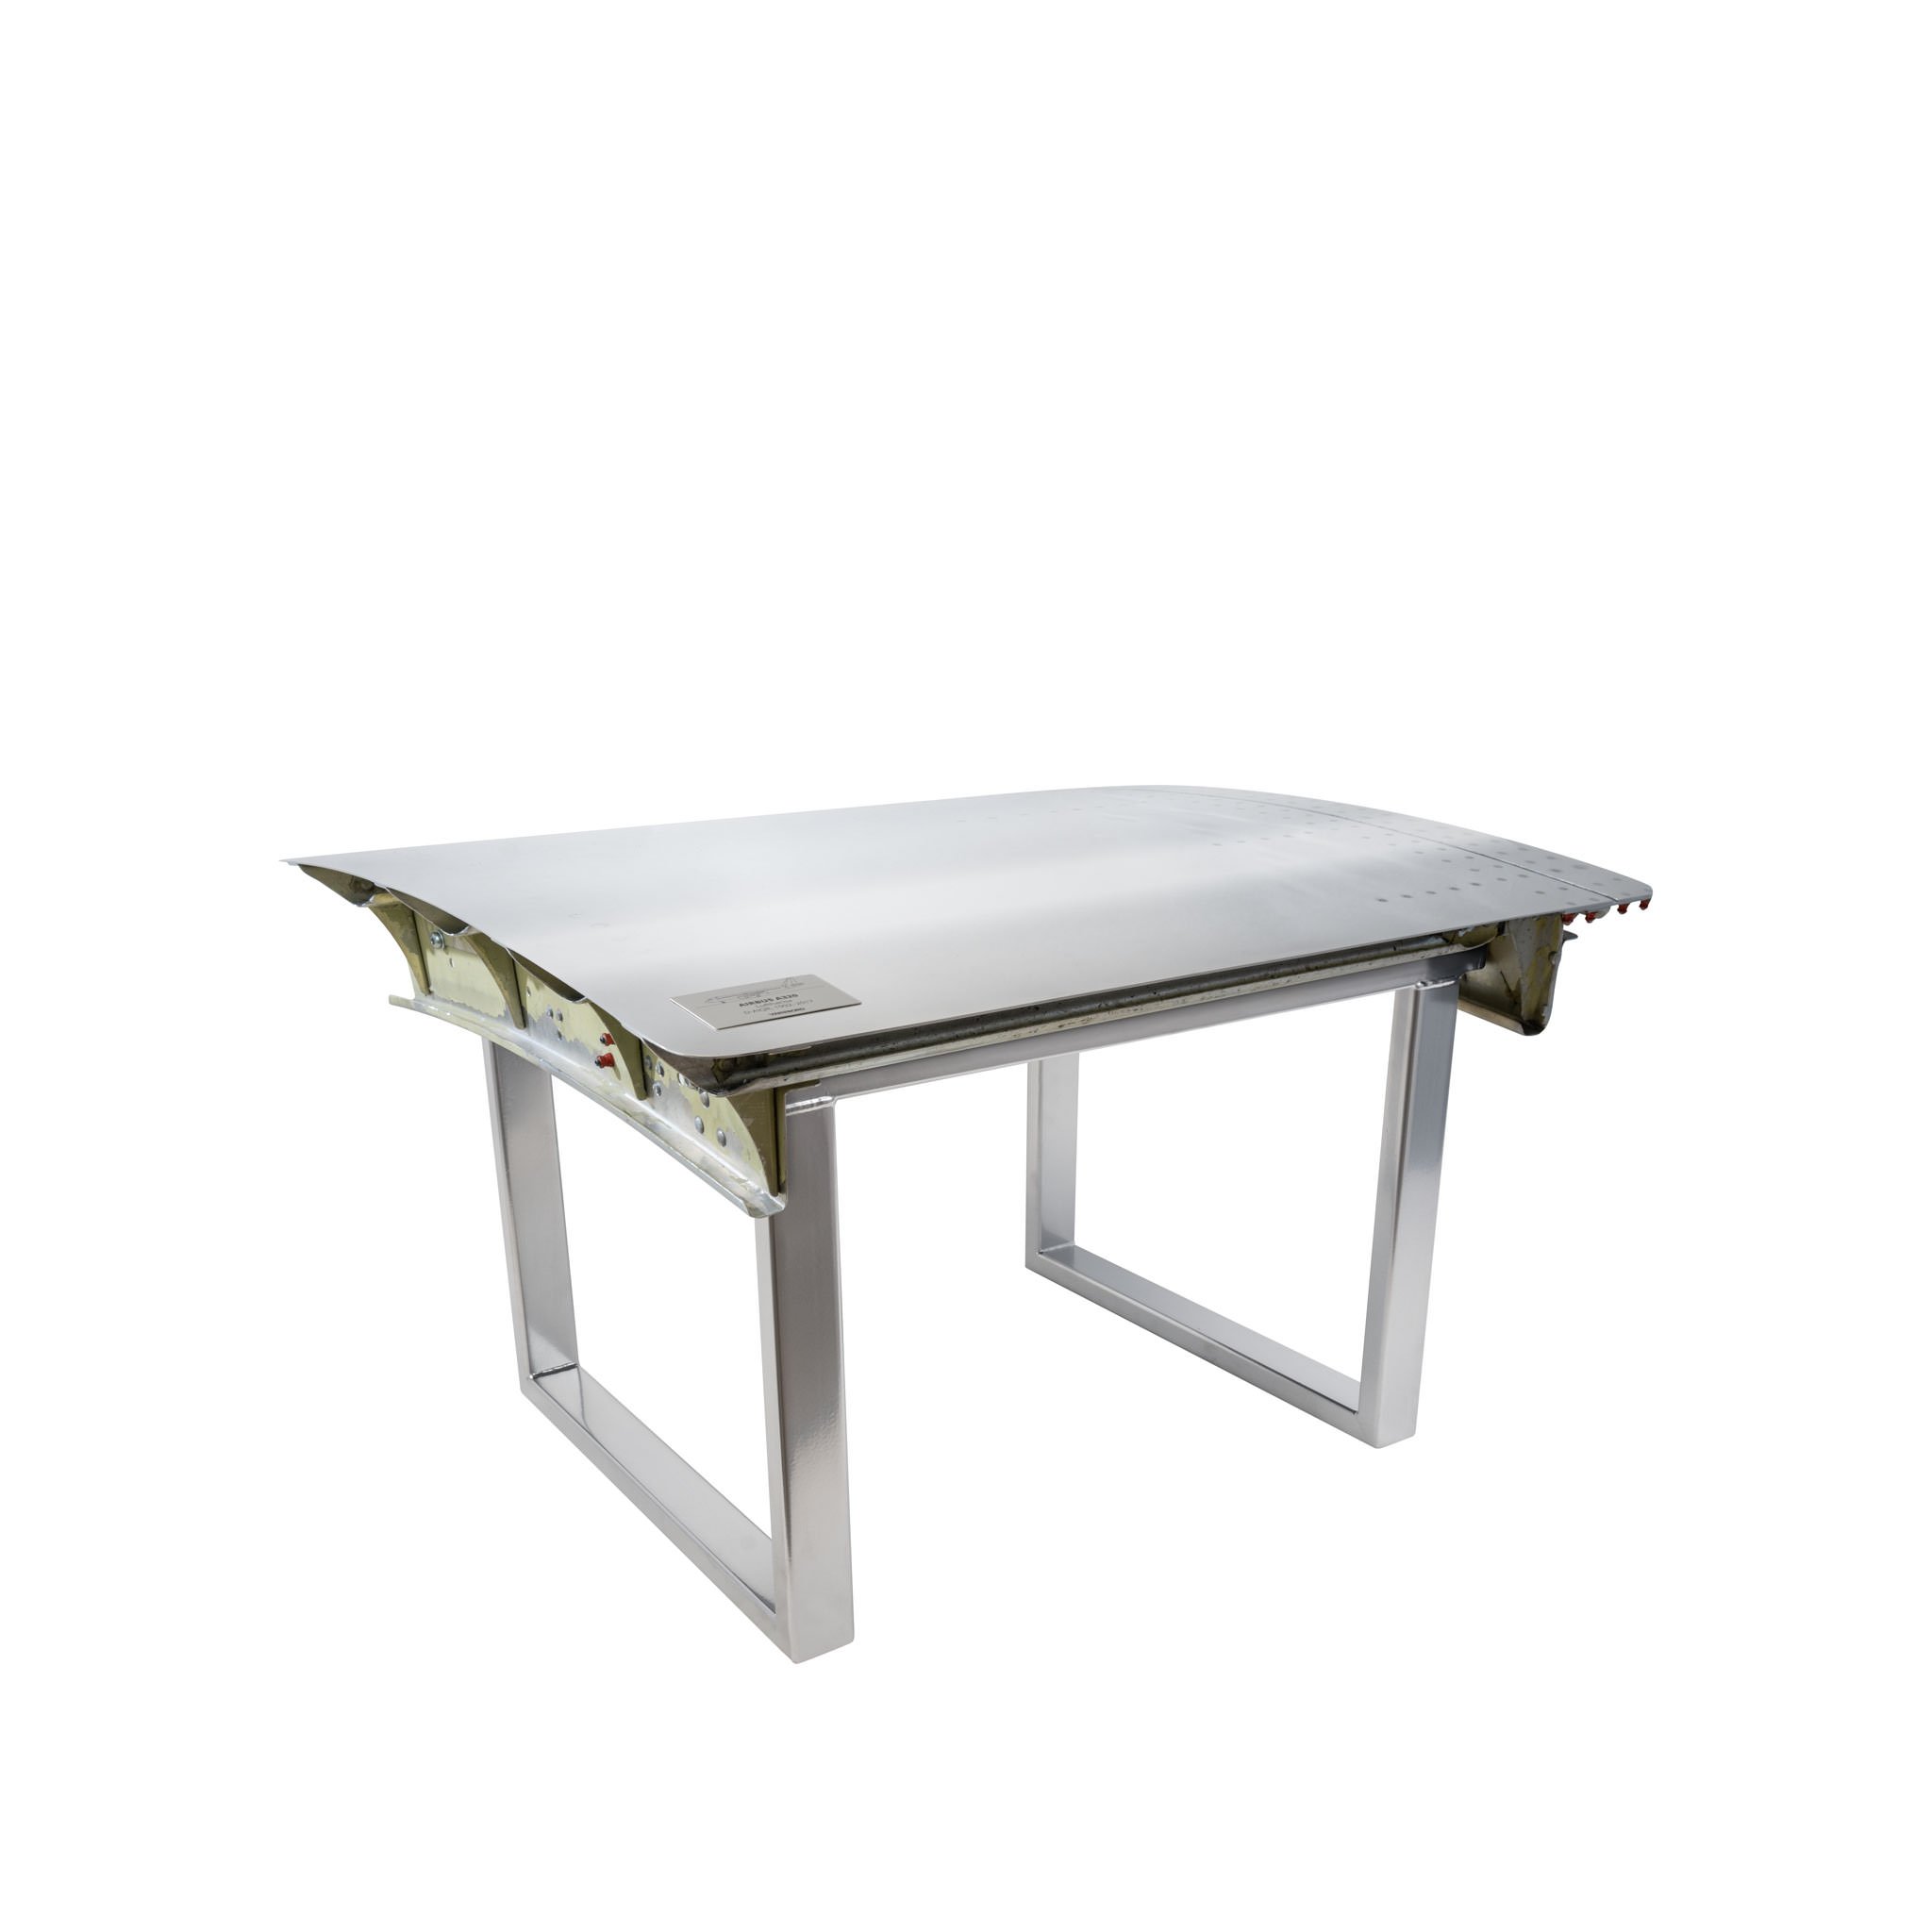 Side Table from Aircraft Parts, Brushed Aluminum, Frame: Chrome, approx. 62 x 59 cm